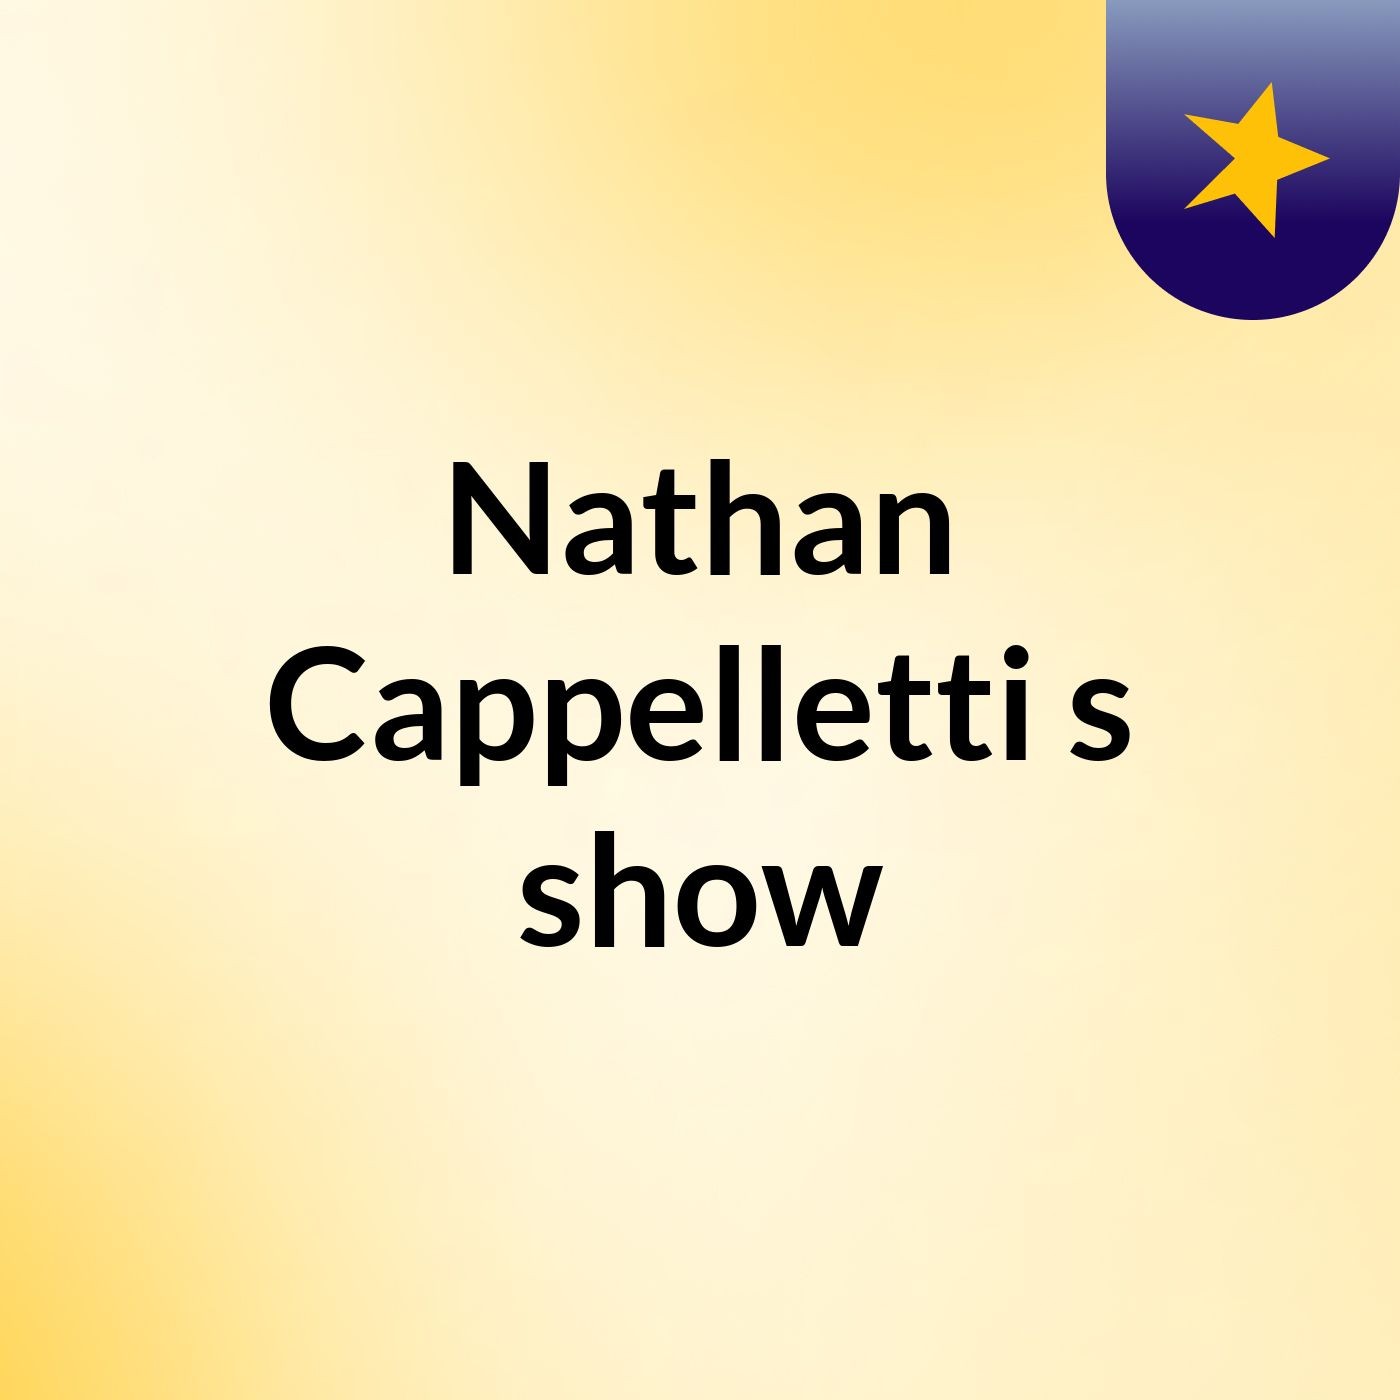 Nathan Cappelletti's show